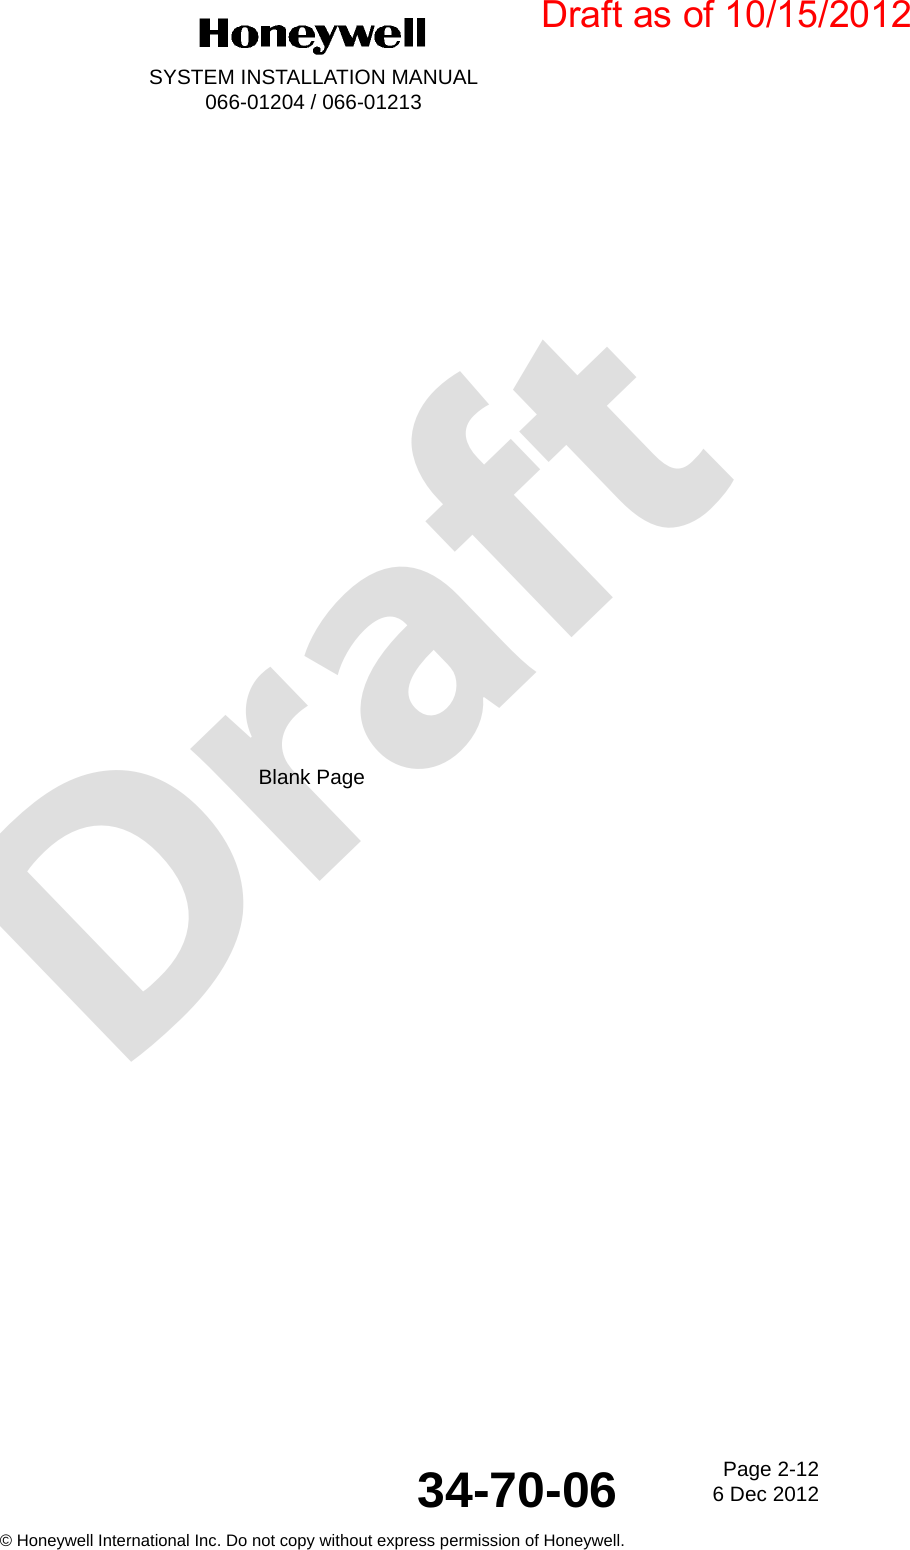 DraftPage 2-126 Dec 201234-70-06SYSTEM INSTALLATION MANUAL066-01204 / 066-01213© Honeywell International Inc. Do not copy without express permission of Honeywell.Blank PageDraft as of 10/15/2012